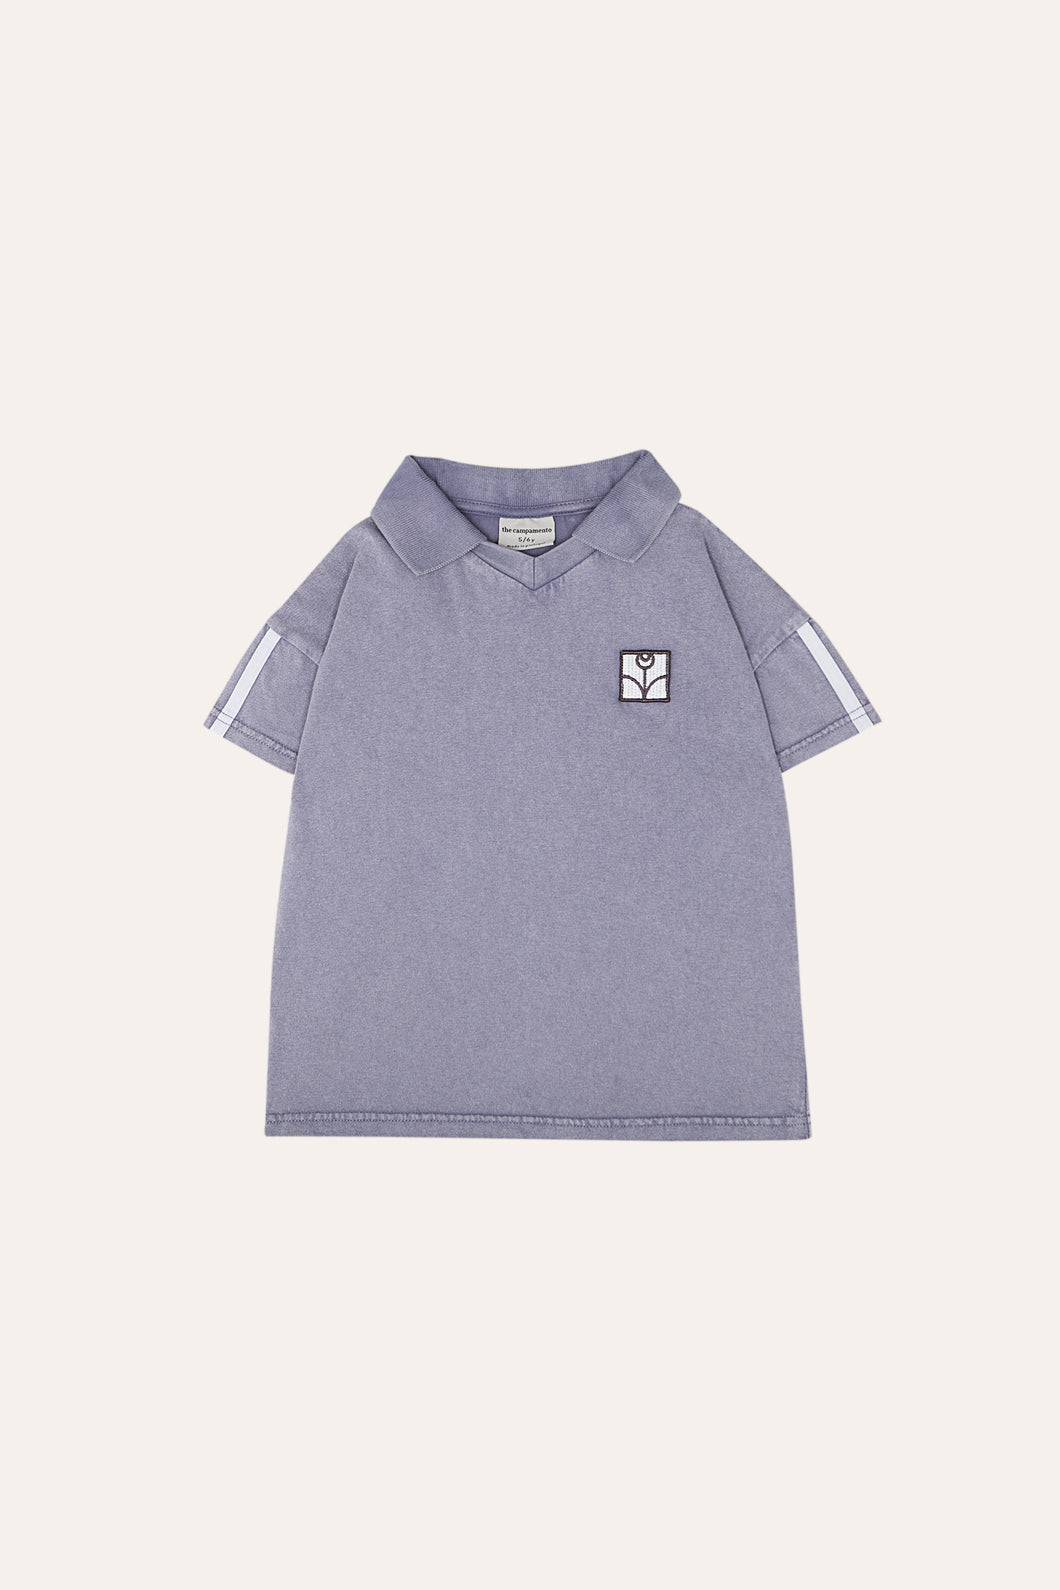 The Campamento / KID / Polo / Blue Washed